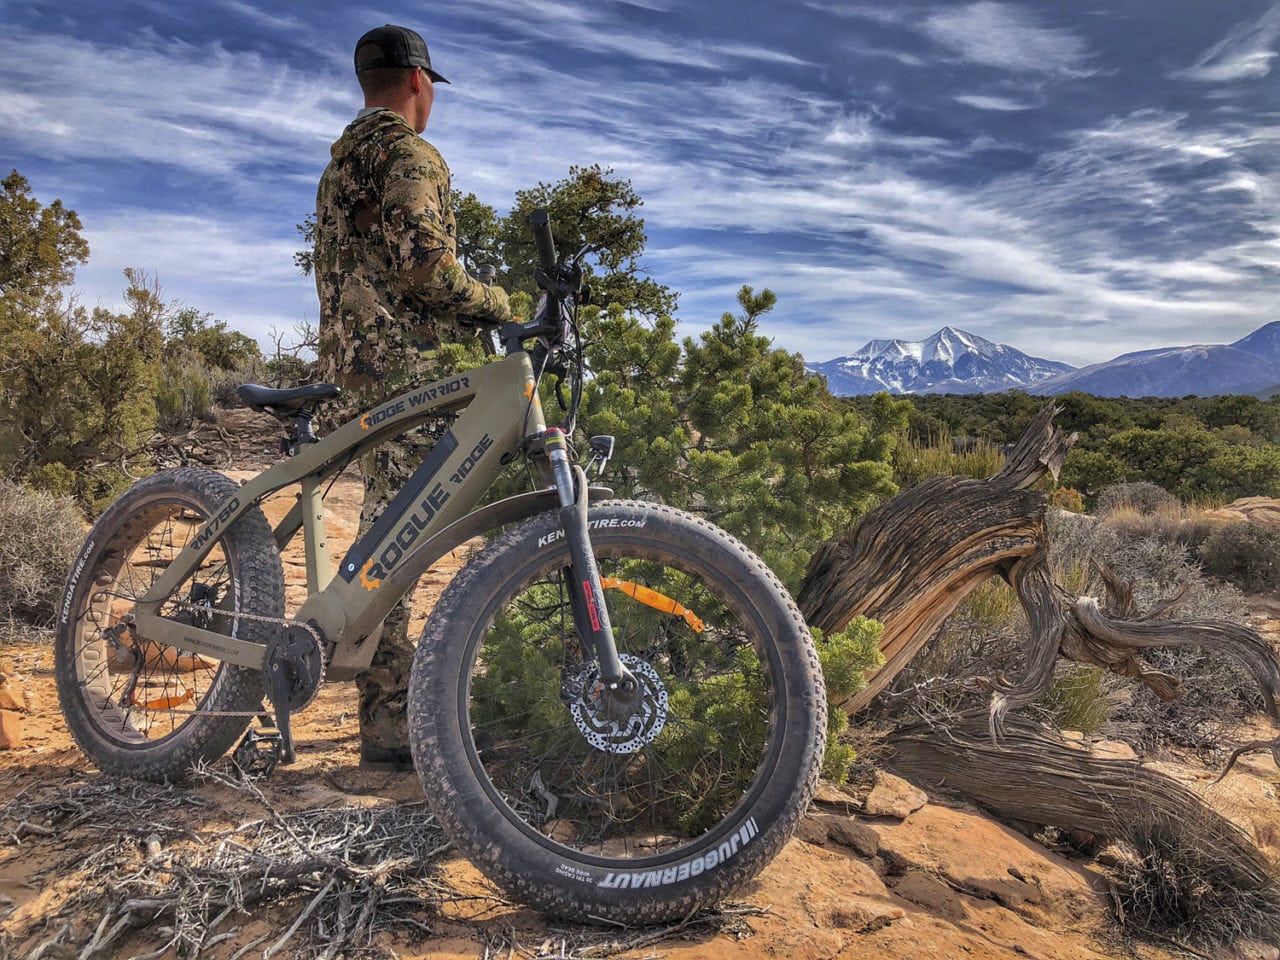 “GO ROGUE” WITH THE NEW RIDGE WARRIOR RM750 ELECTRIC FAT-TIRE BIKE  FROM ROGUE RIDGE™